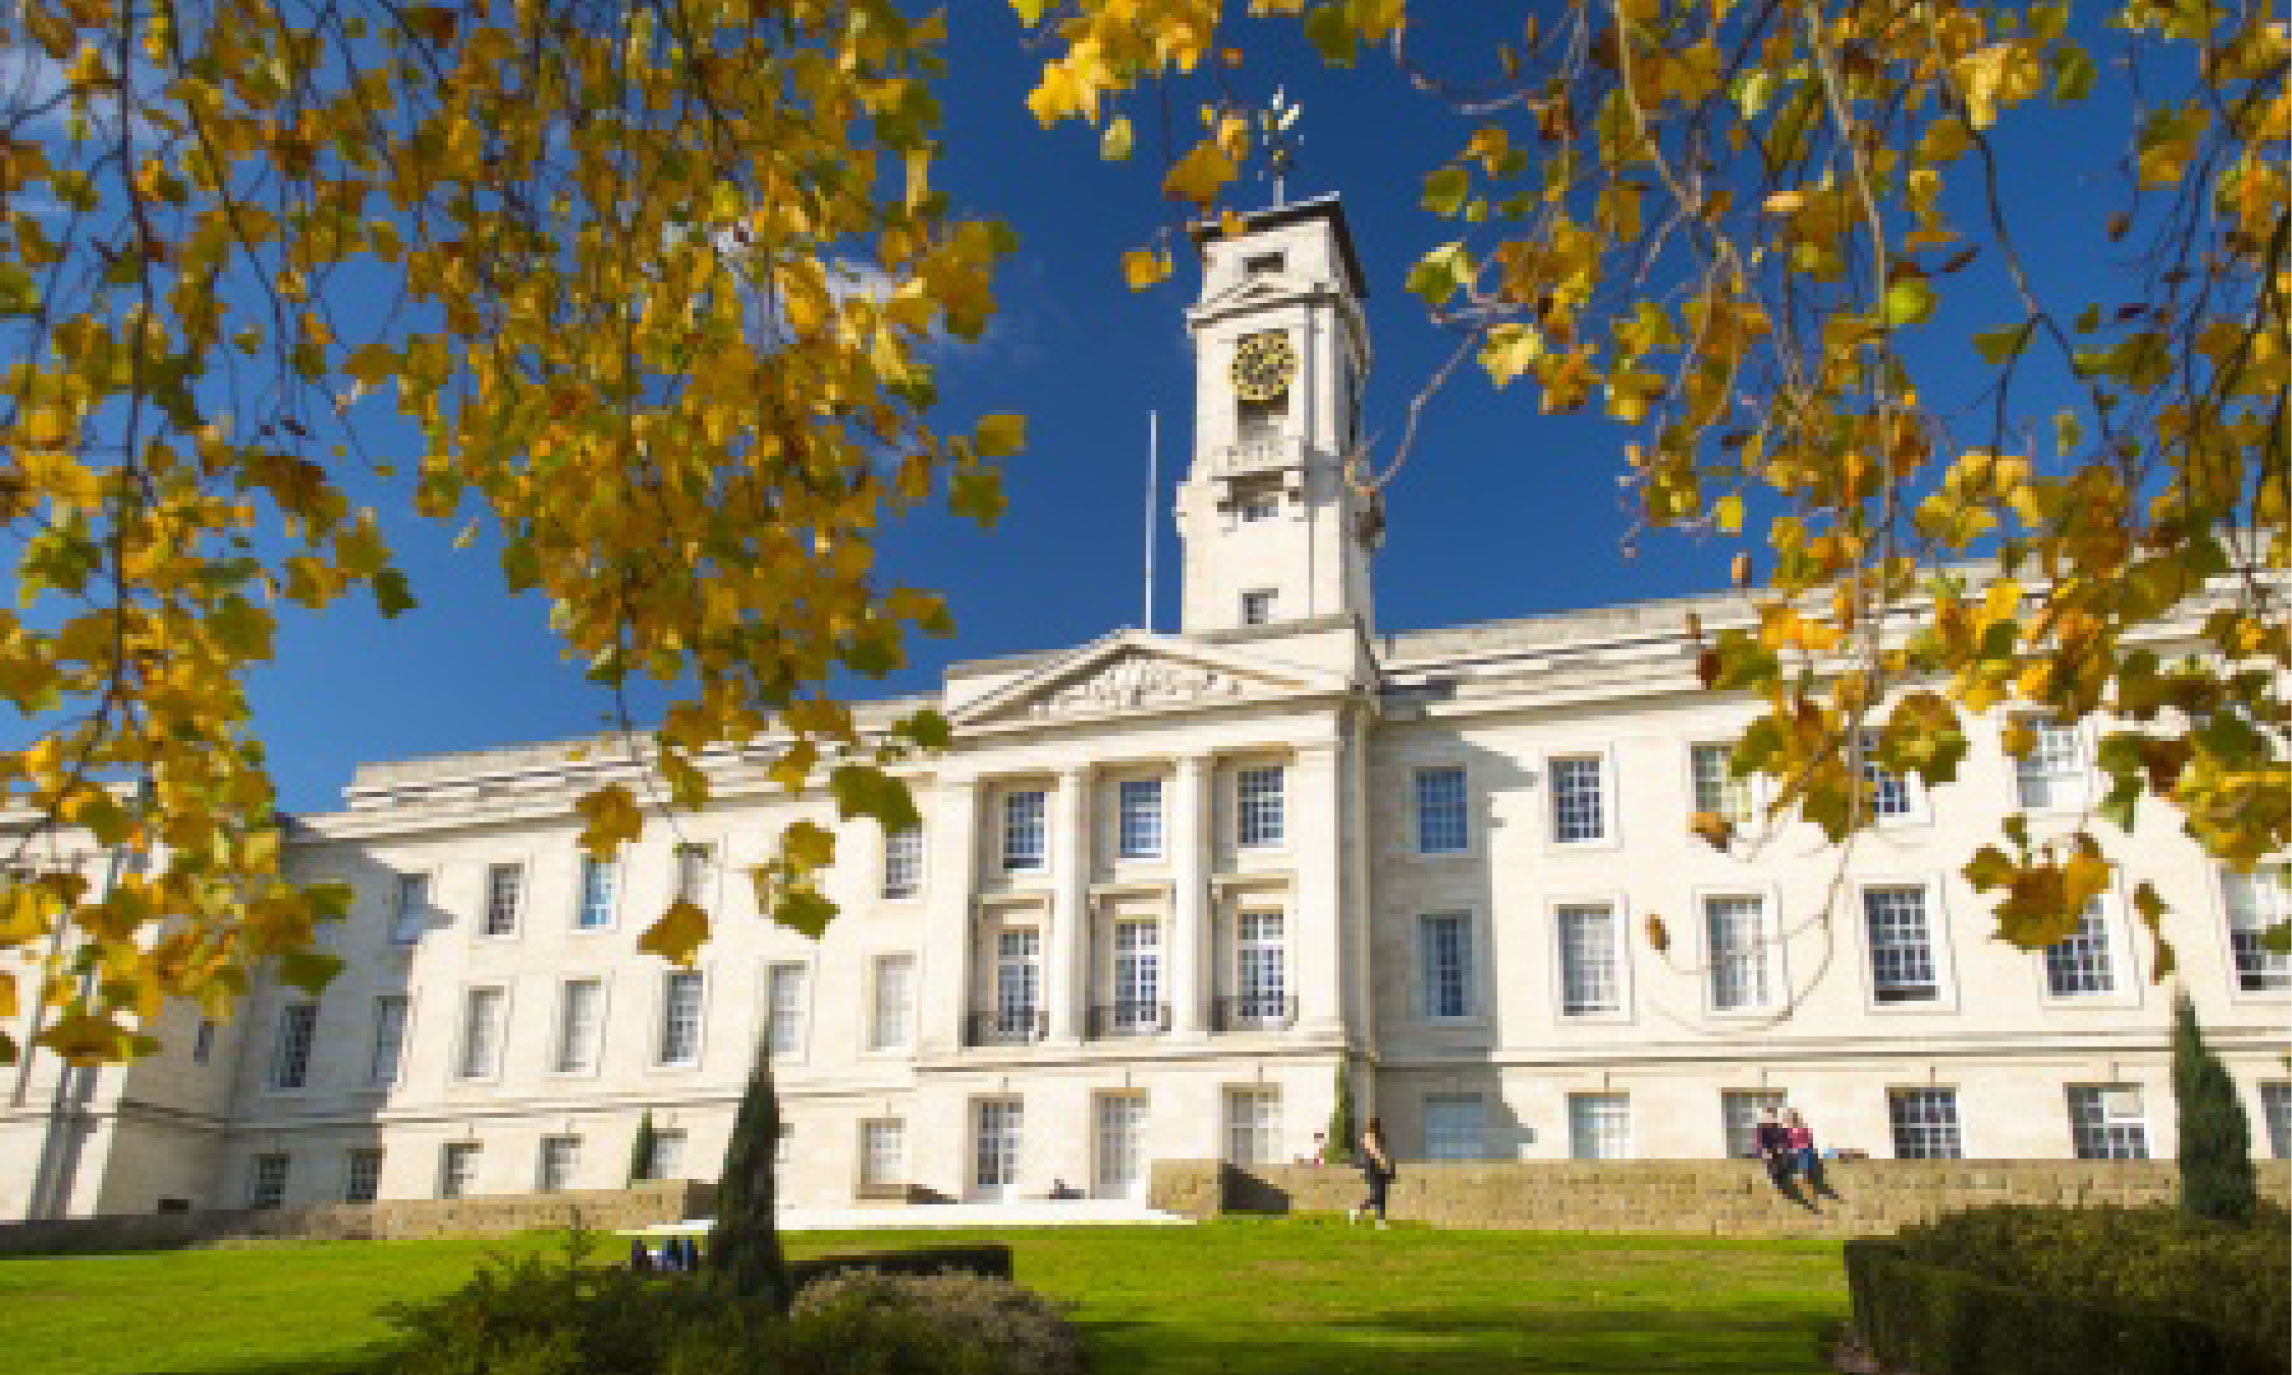 Trent Building and autumn leaves